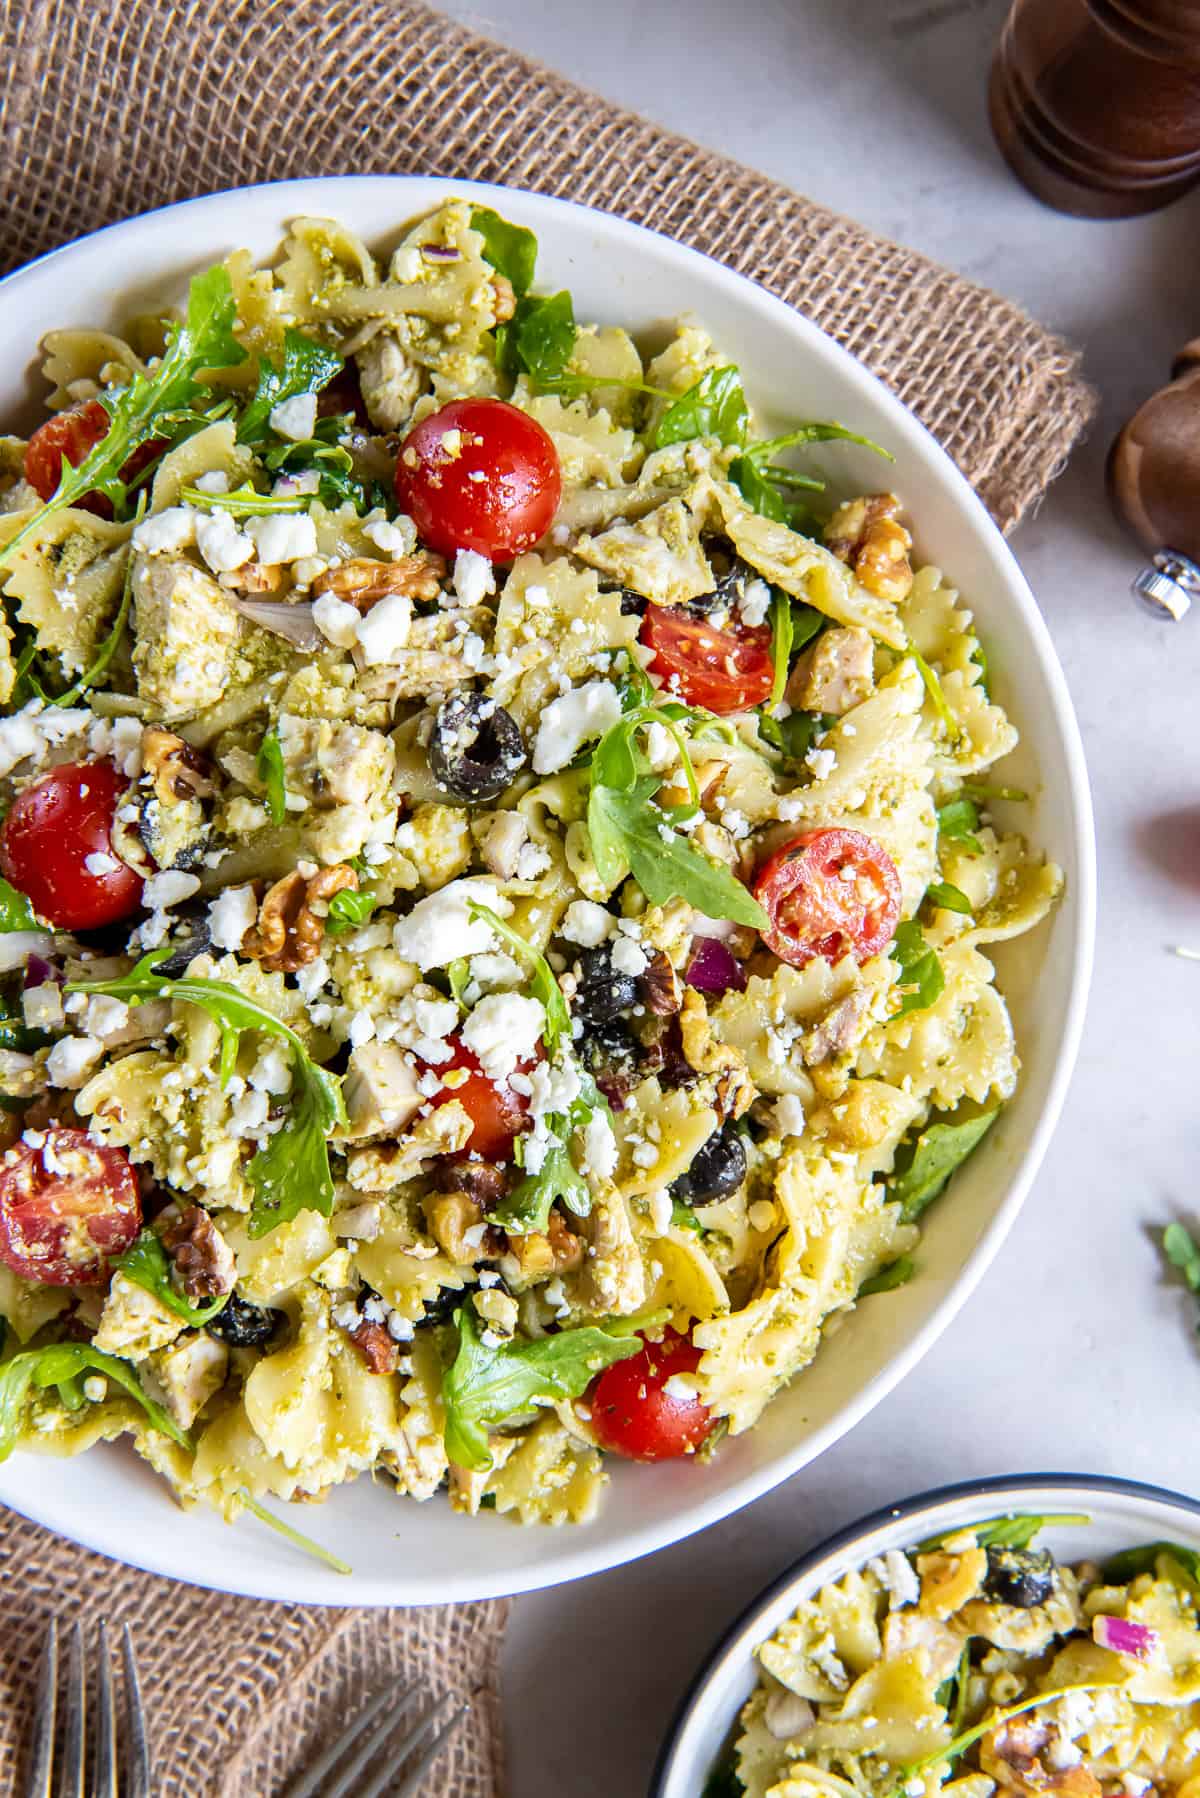 A top down shot of a large serving bowl filled with pasta salad with chicken, pesto, cherry tomatoes, and feta cheese.